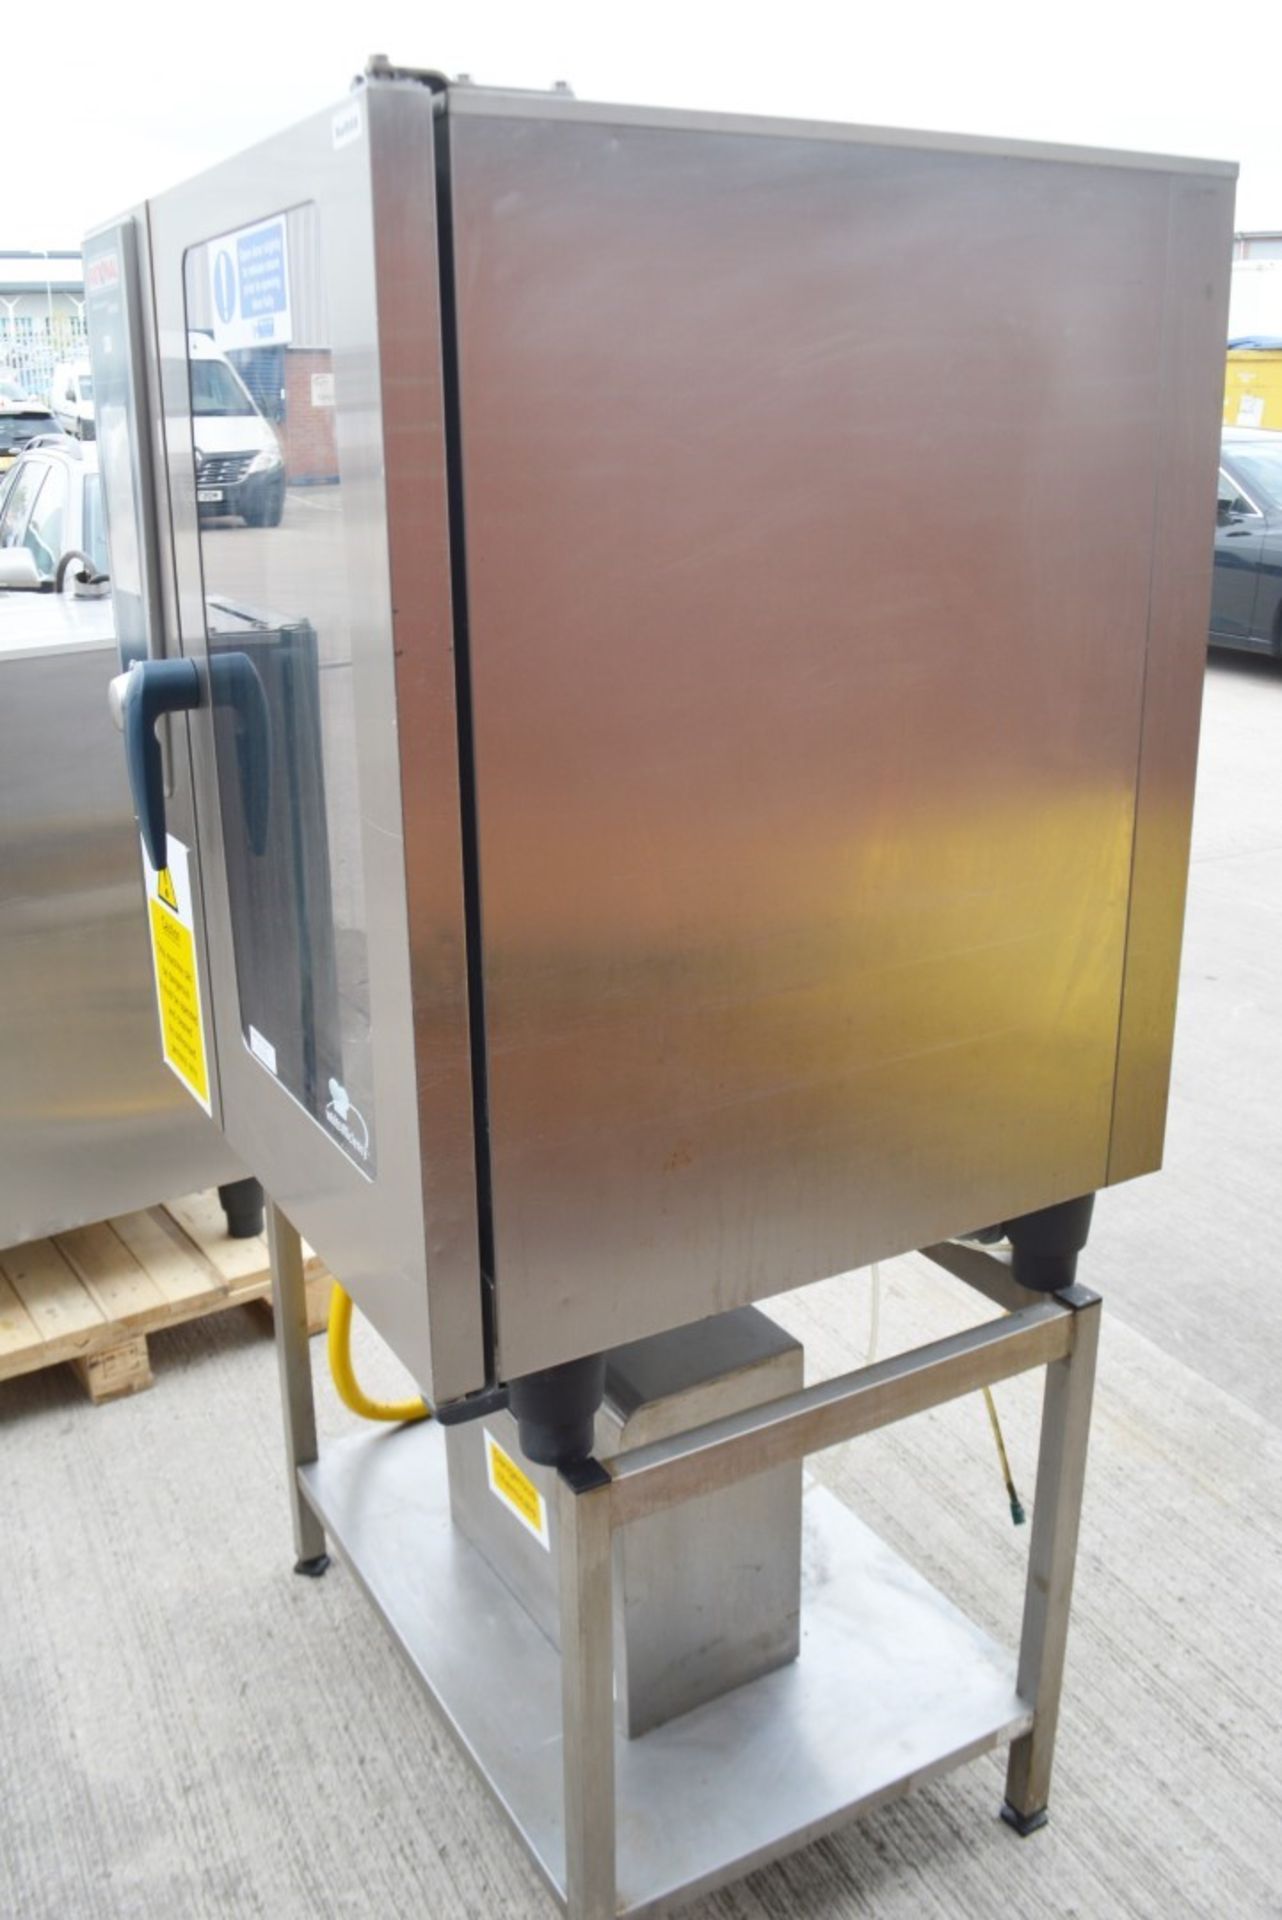 1 x Rational SCC 10 Combi Oven - Dimensions: H171 x W84 x D77 cms - Ref 668 WH2 - CL653 - Recently - Image 5 of 13